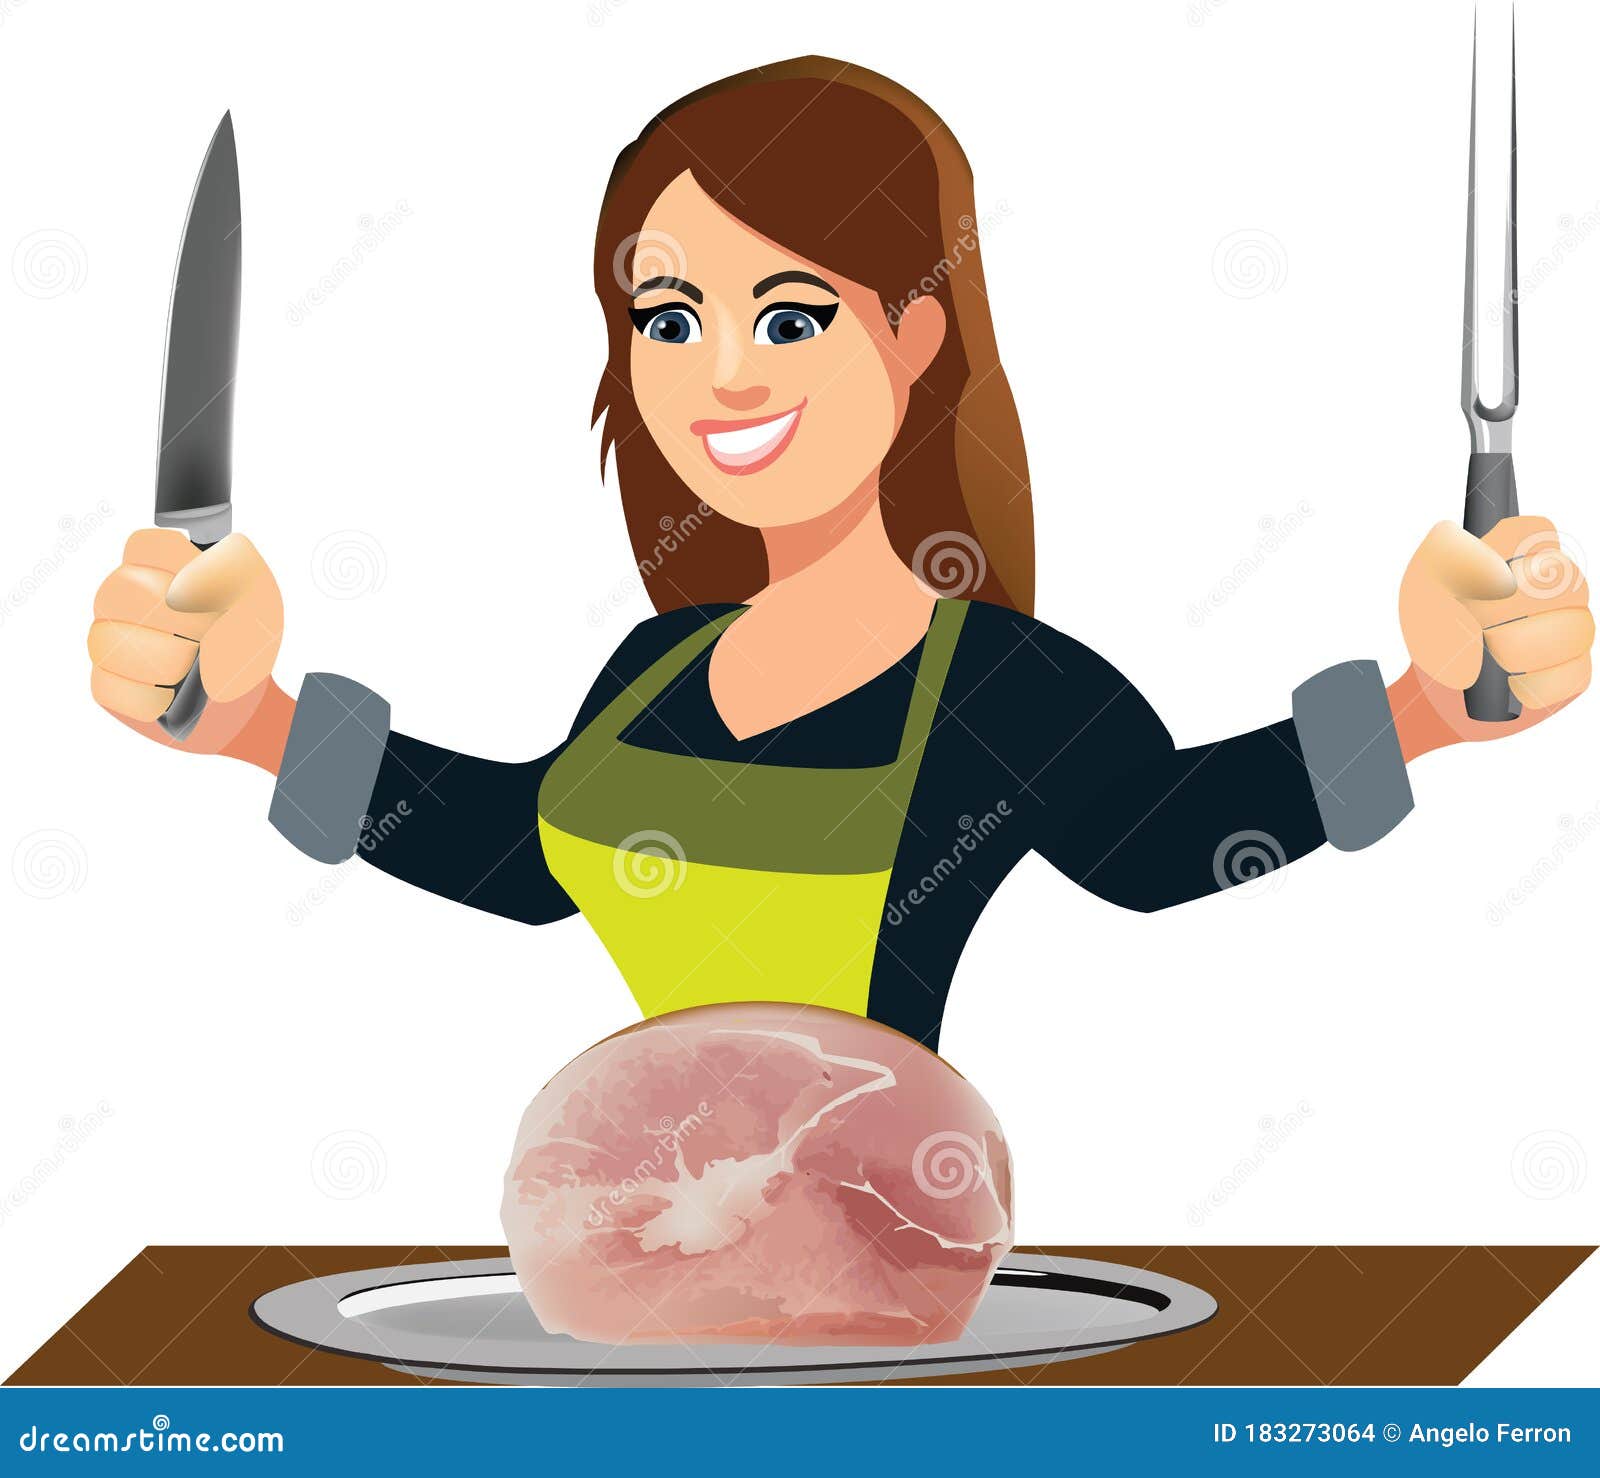 woman massaia cook with fork and knife and ham